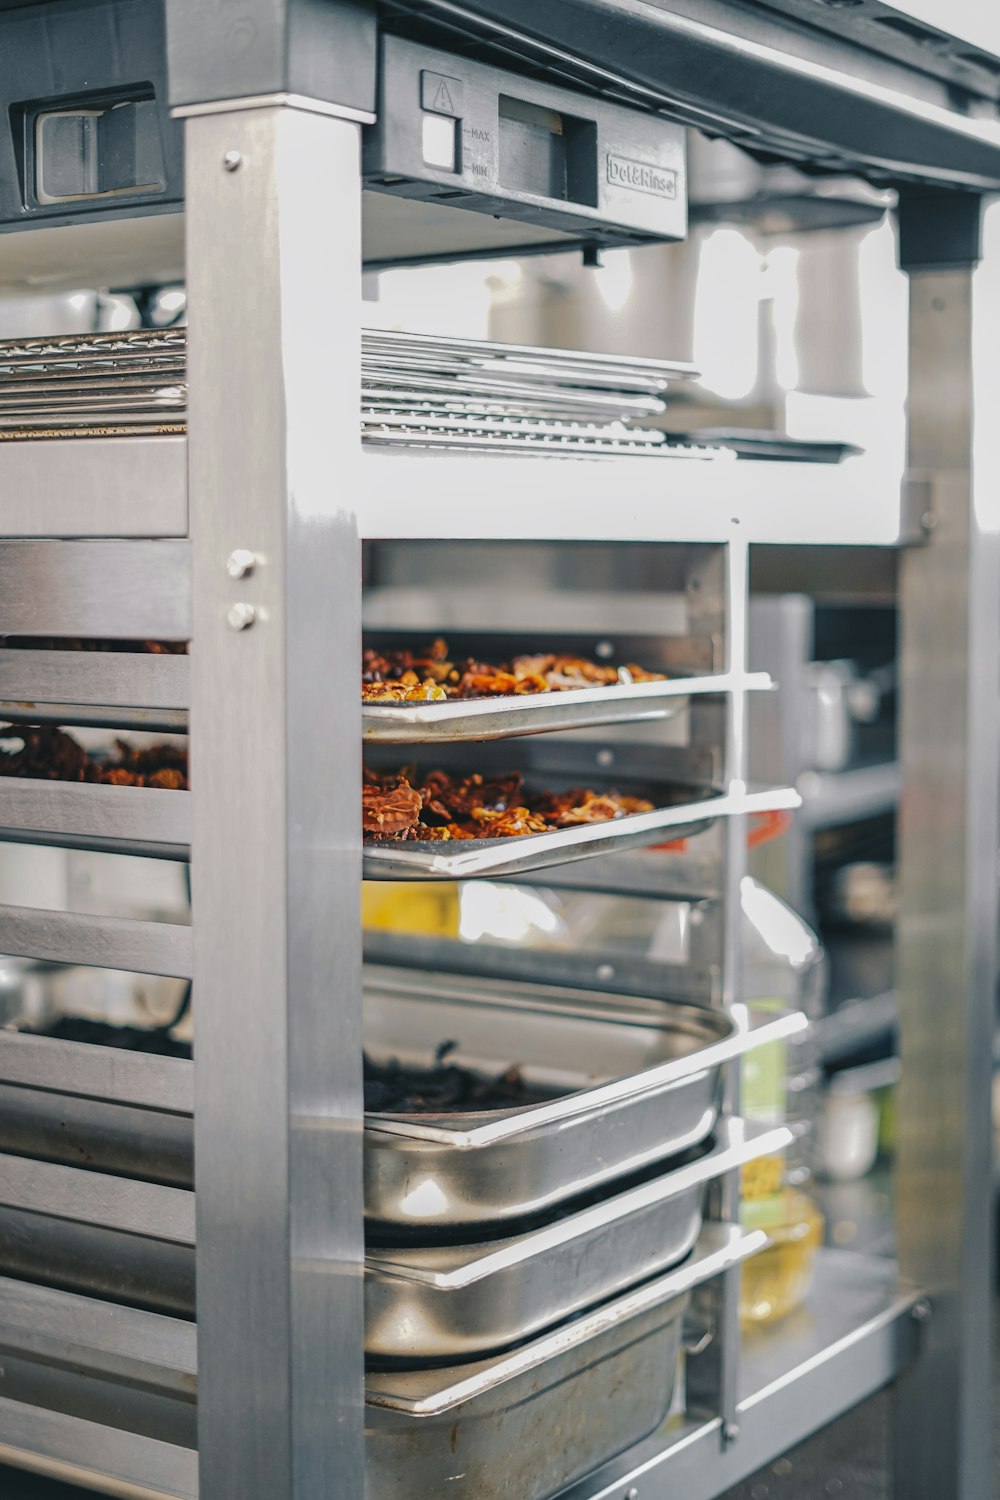 a commercial oven with several trays of food in it